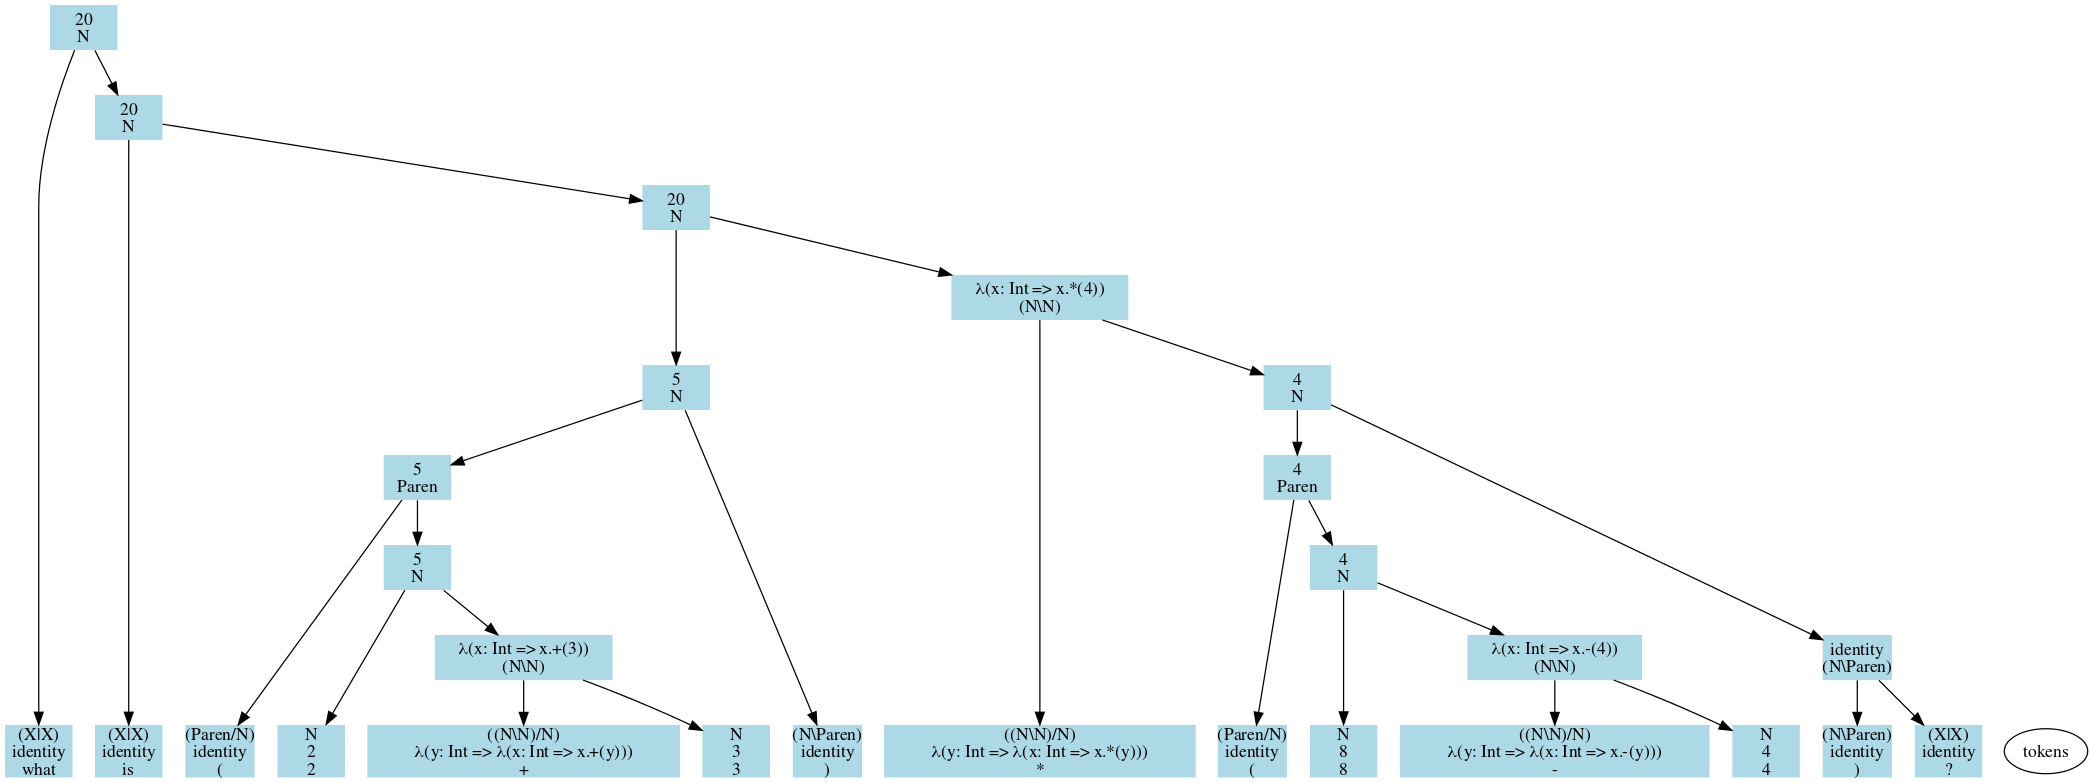 An example semantic parse tree